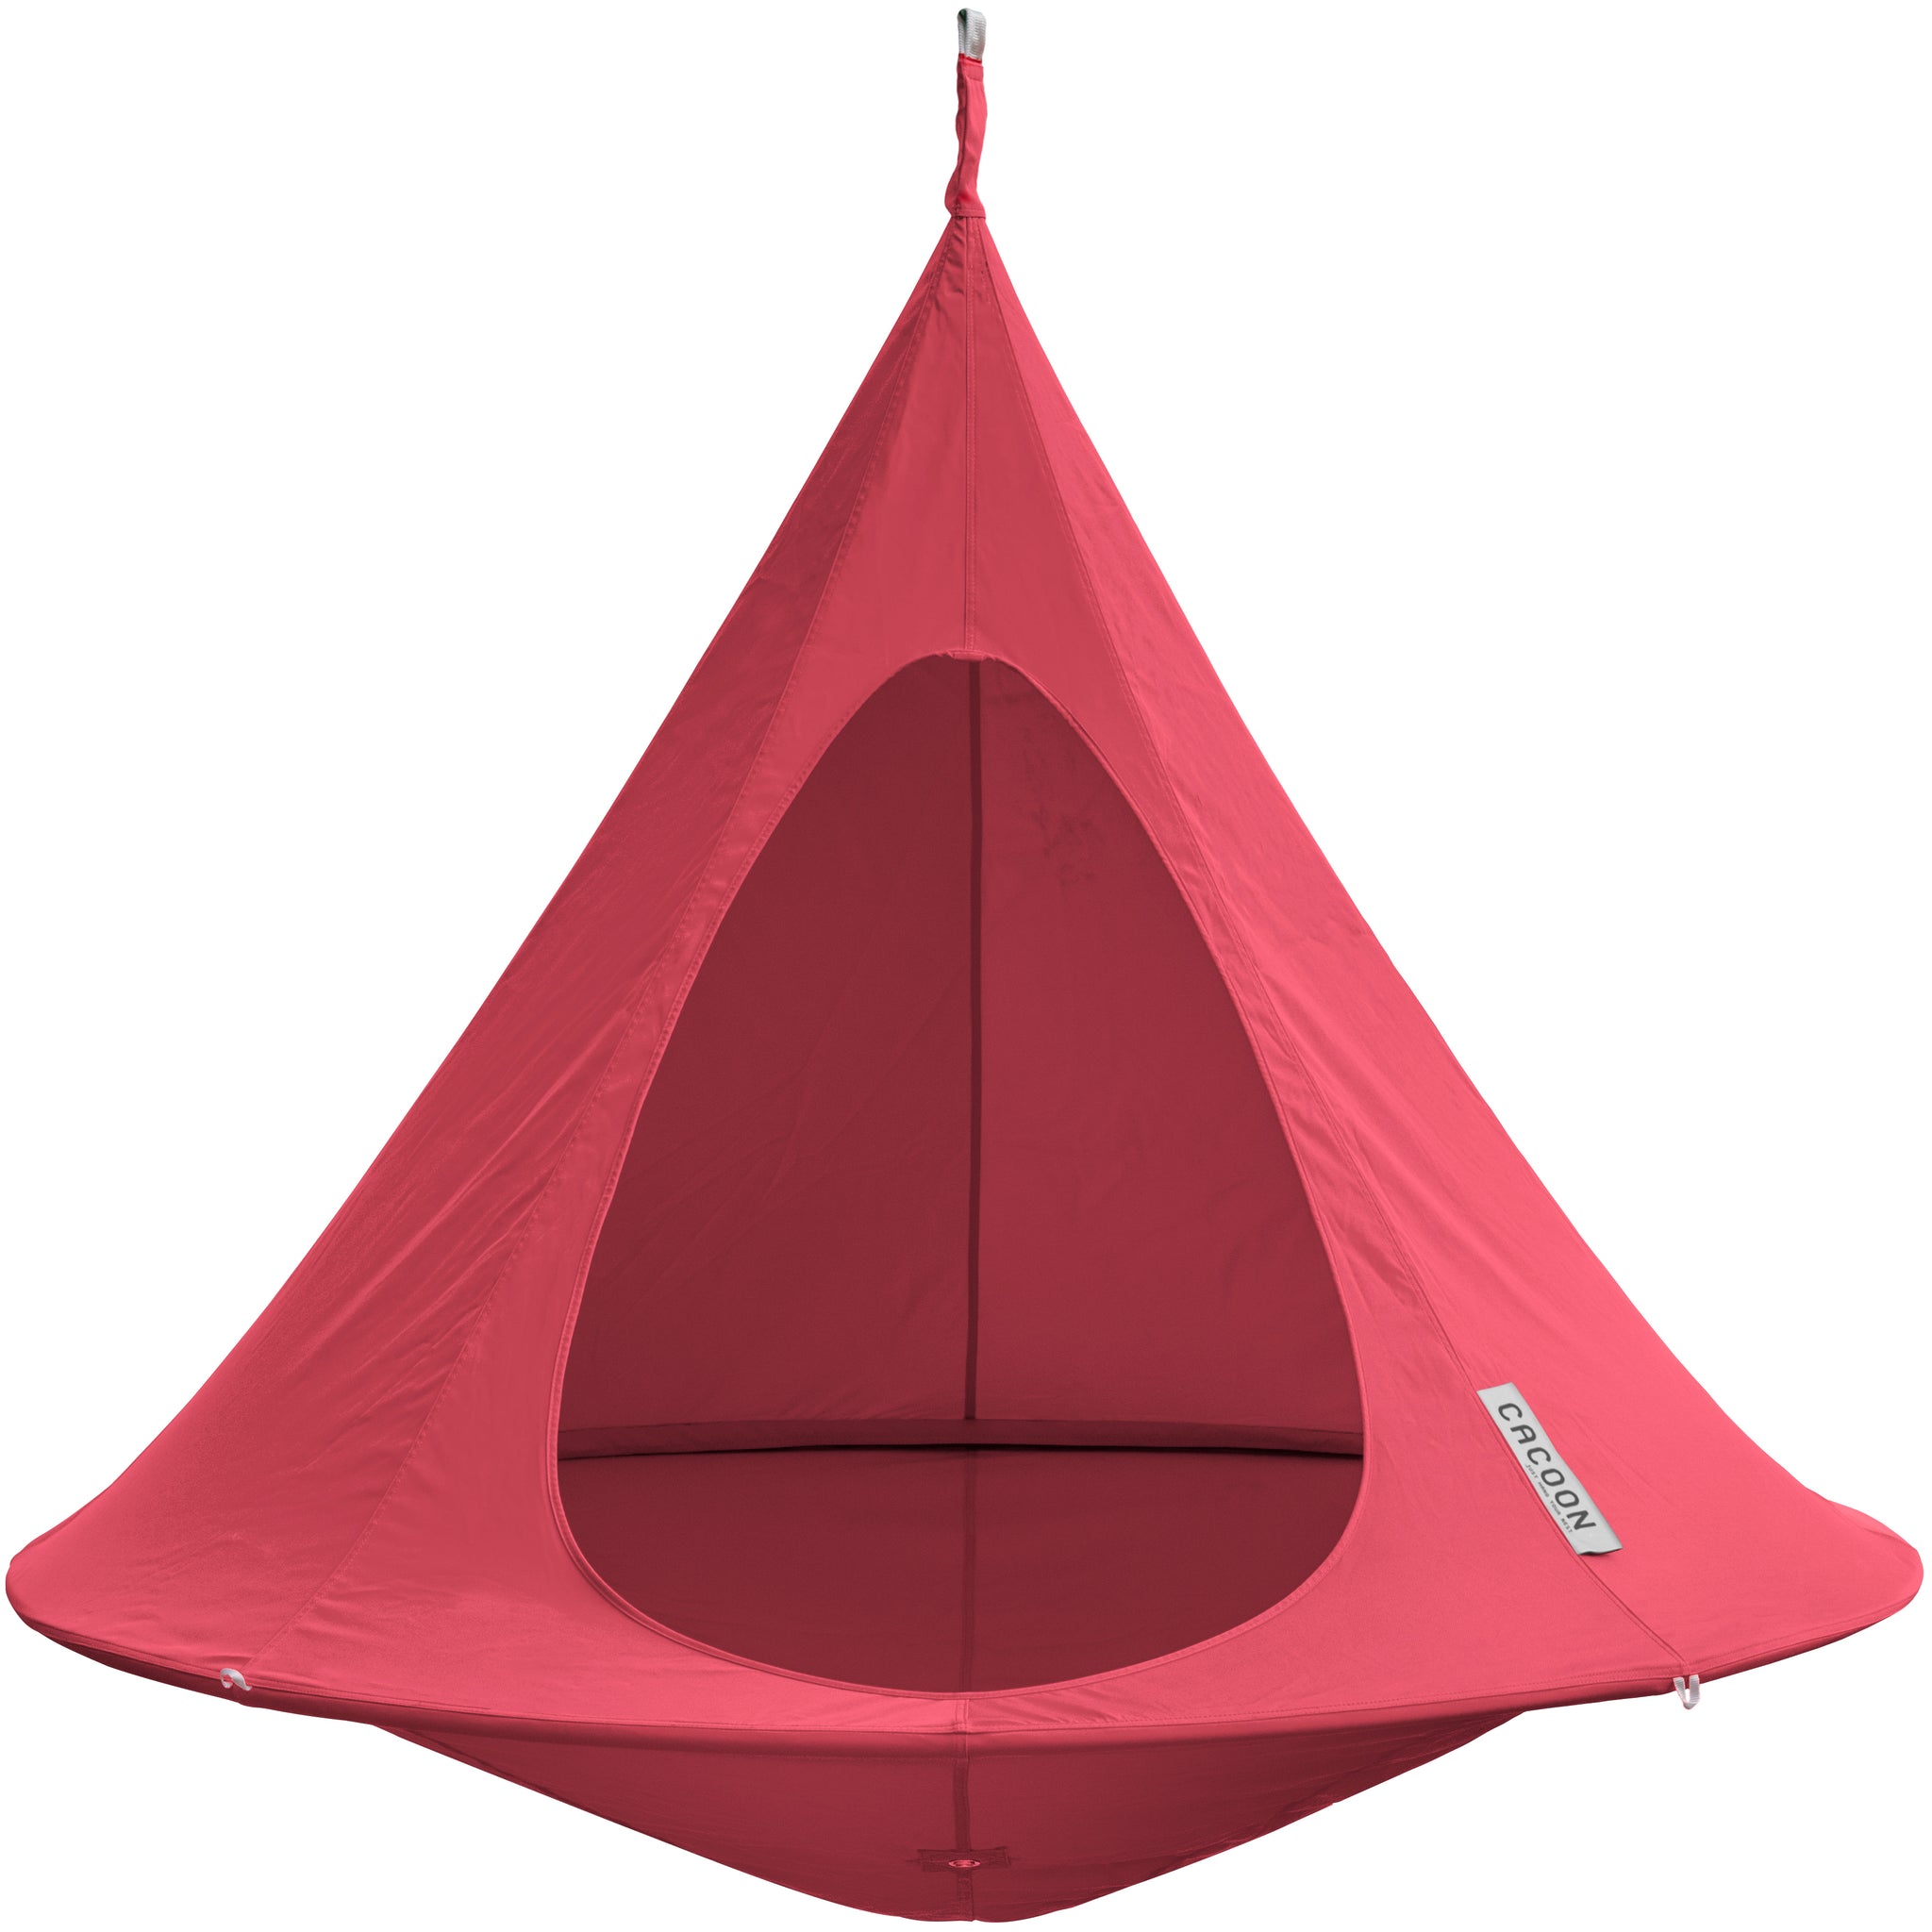 Cacoon Double – Europe BV